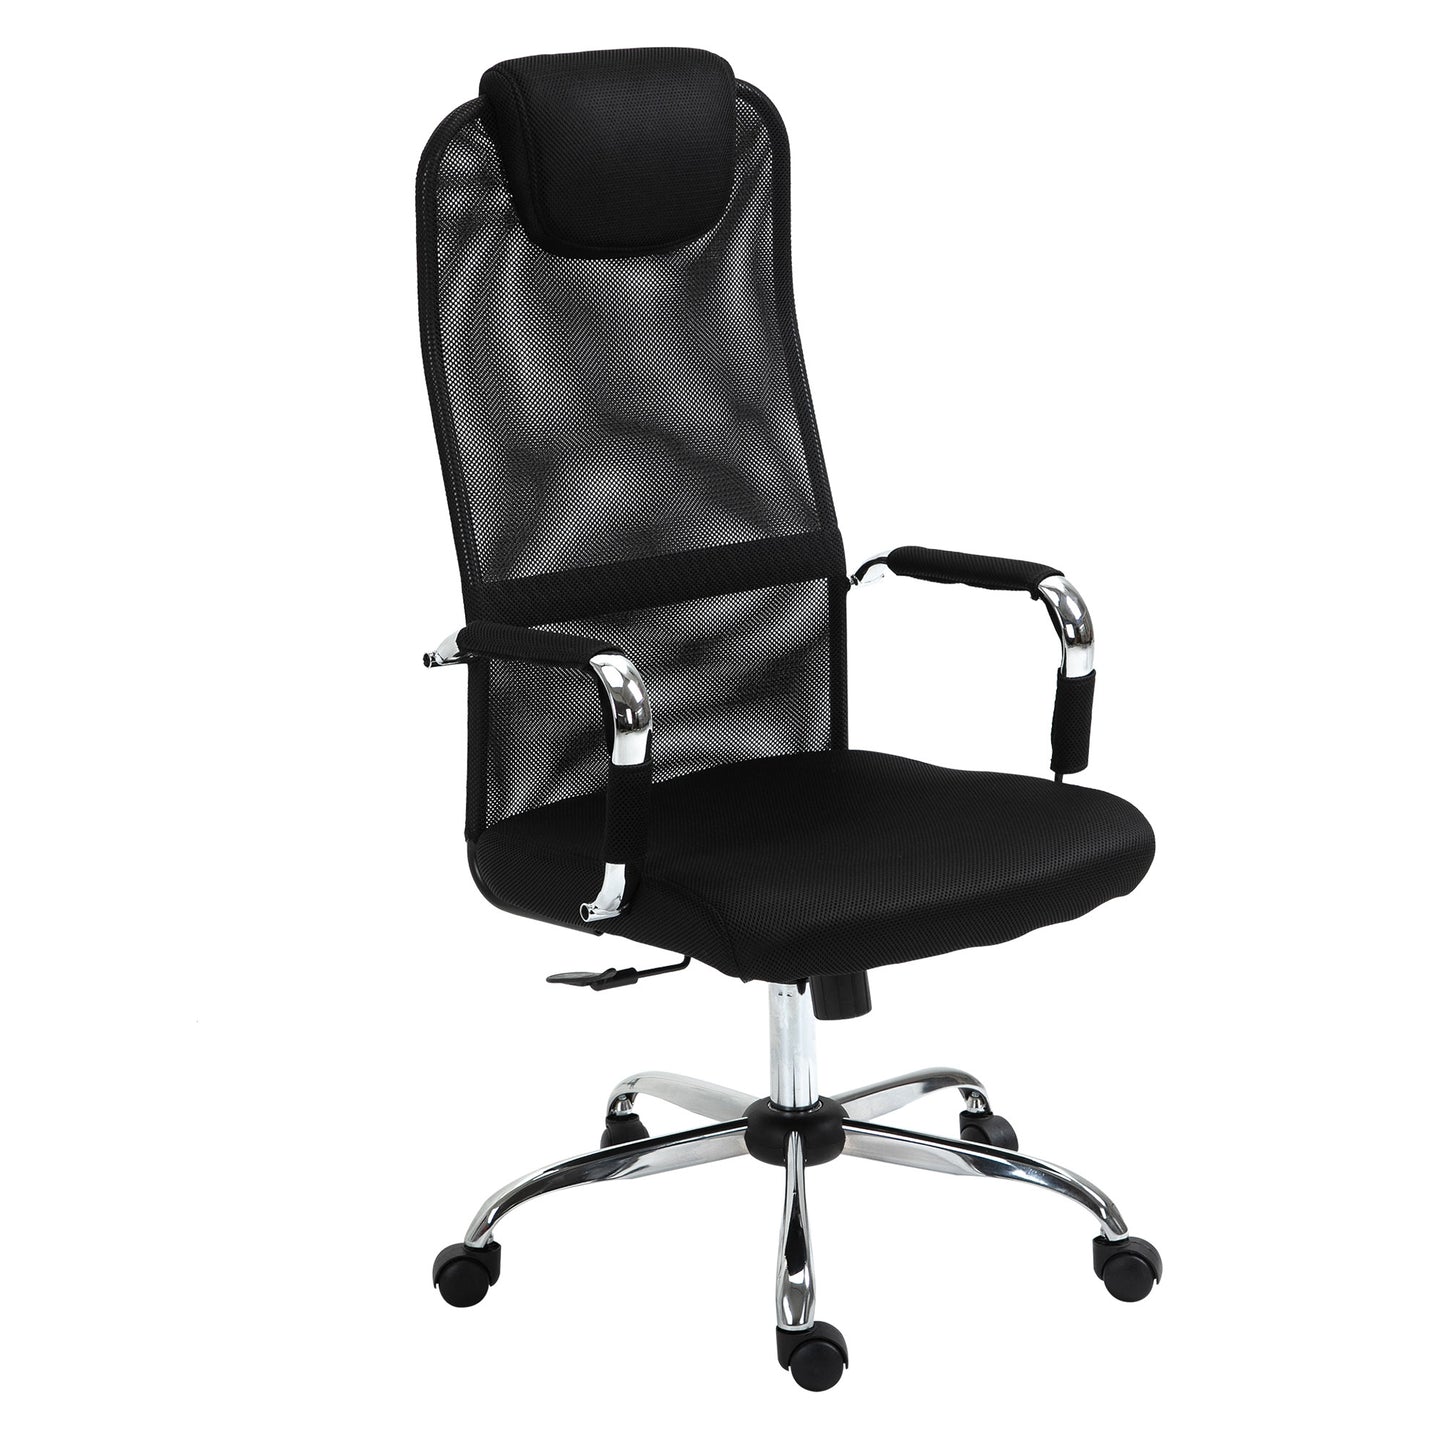 Vinsetto Mesh Fabric Desk Chair Swivel Office Chair  Home Study Rocker with Wheel, Black